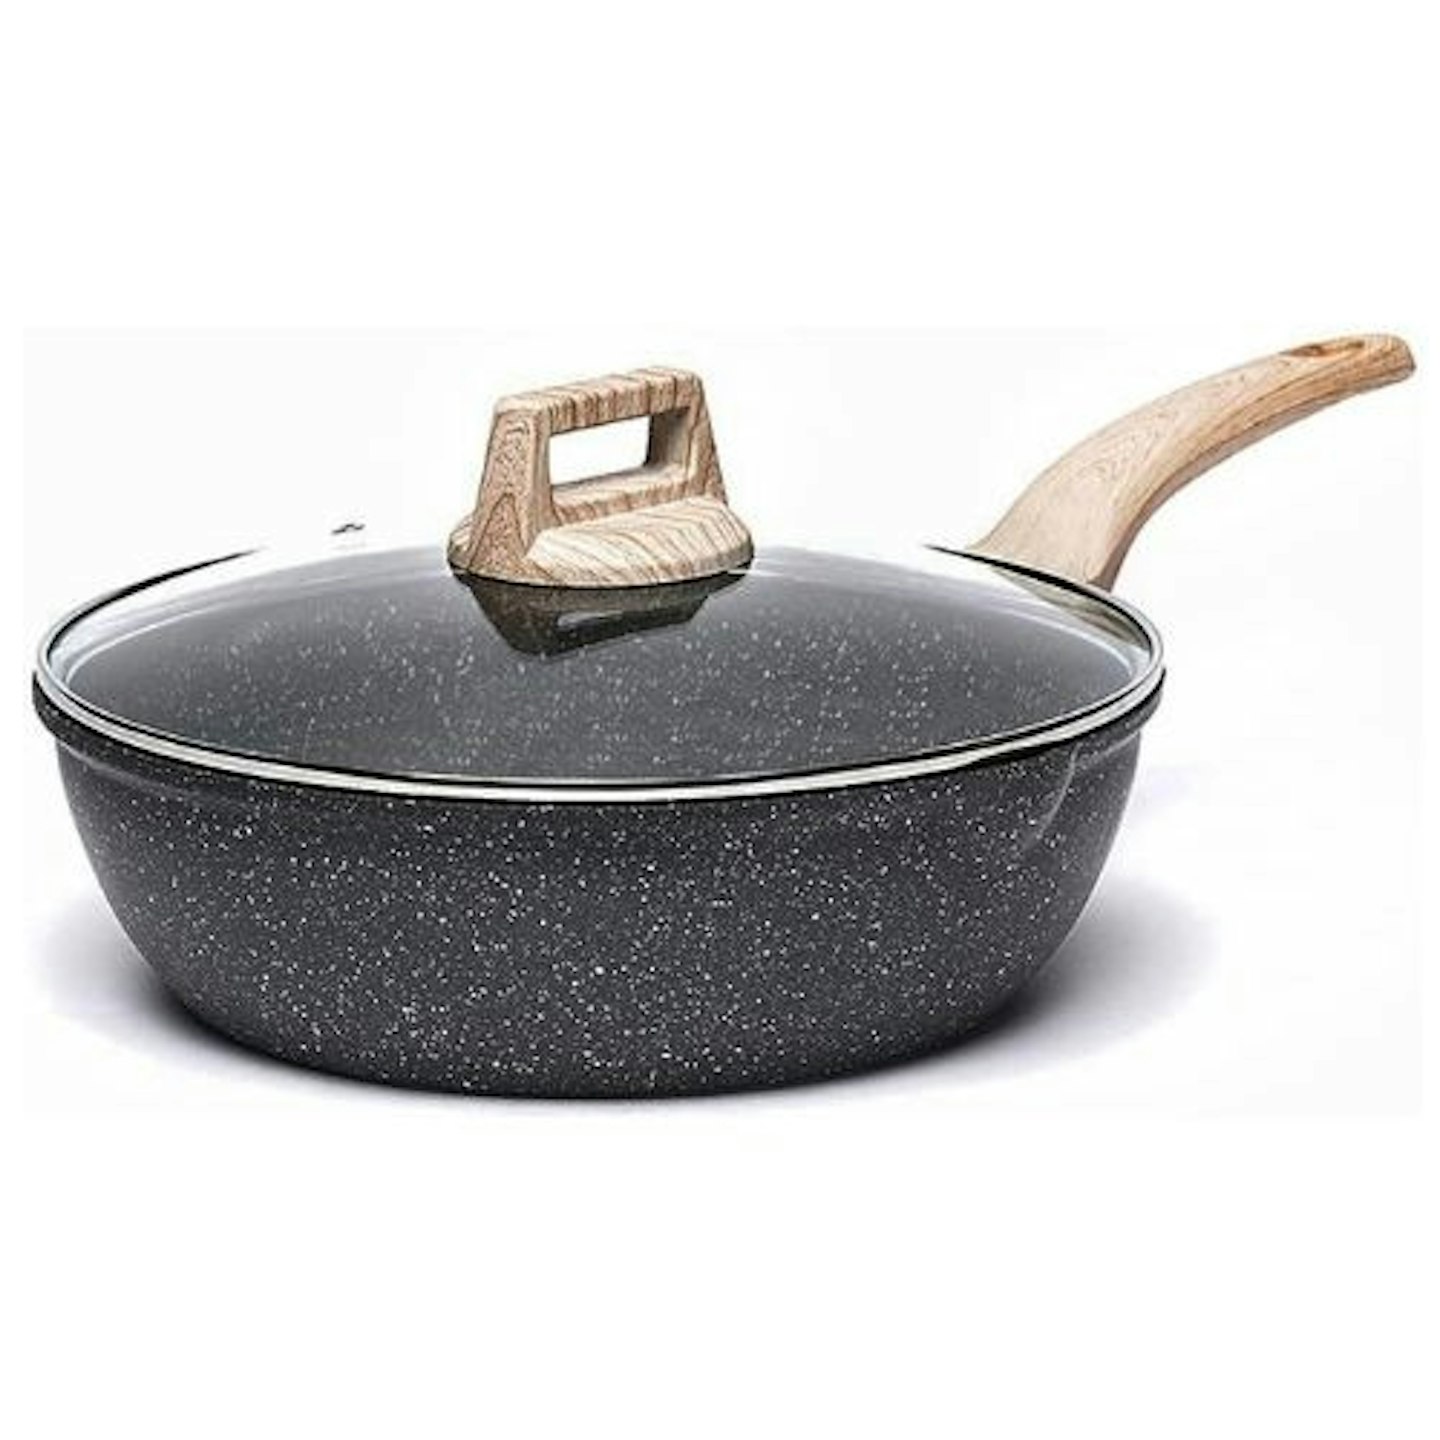 CAROTE Saute Pan with Lid, 24cm